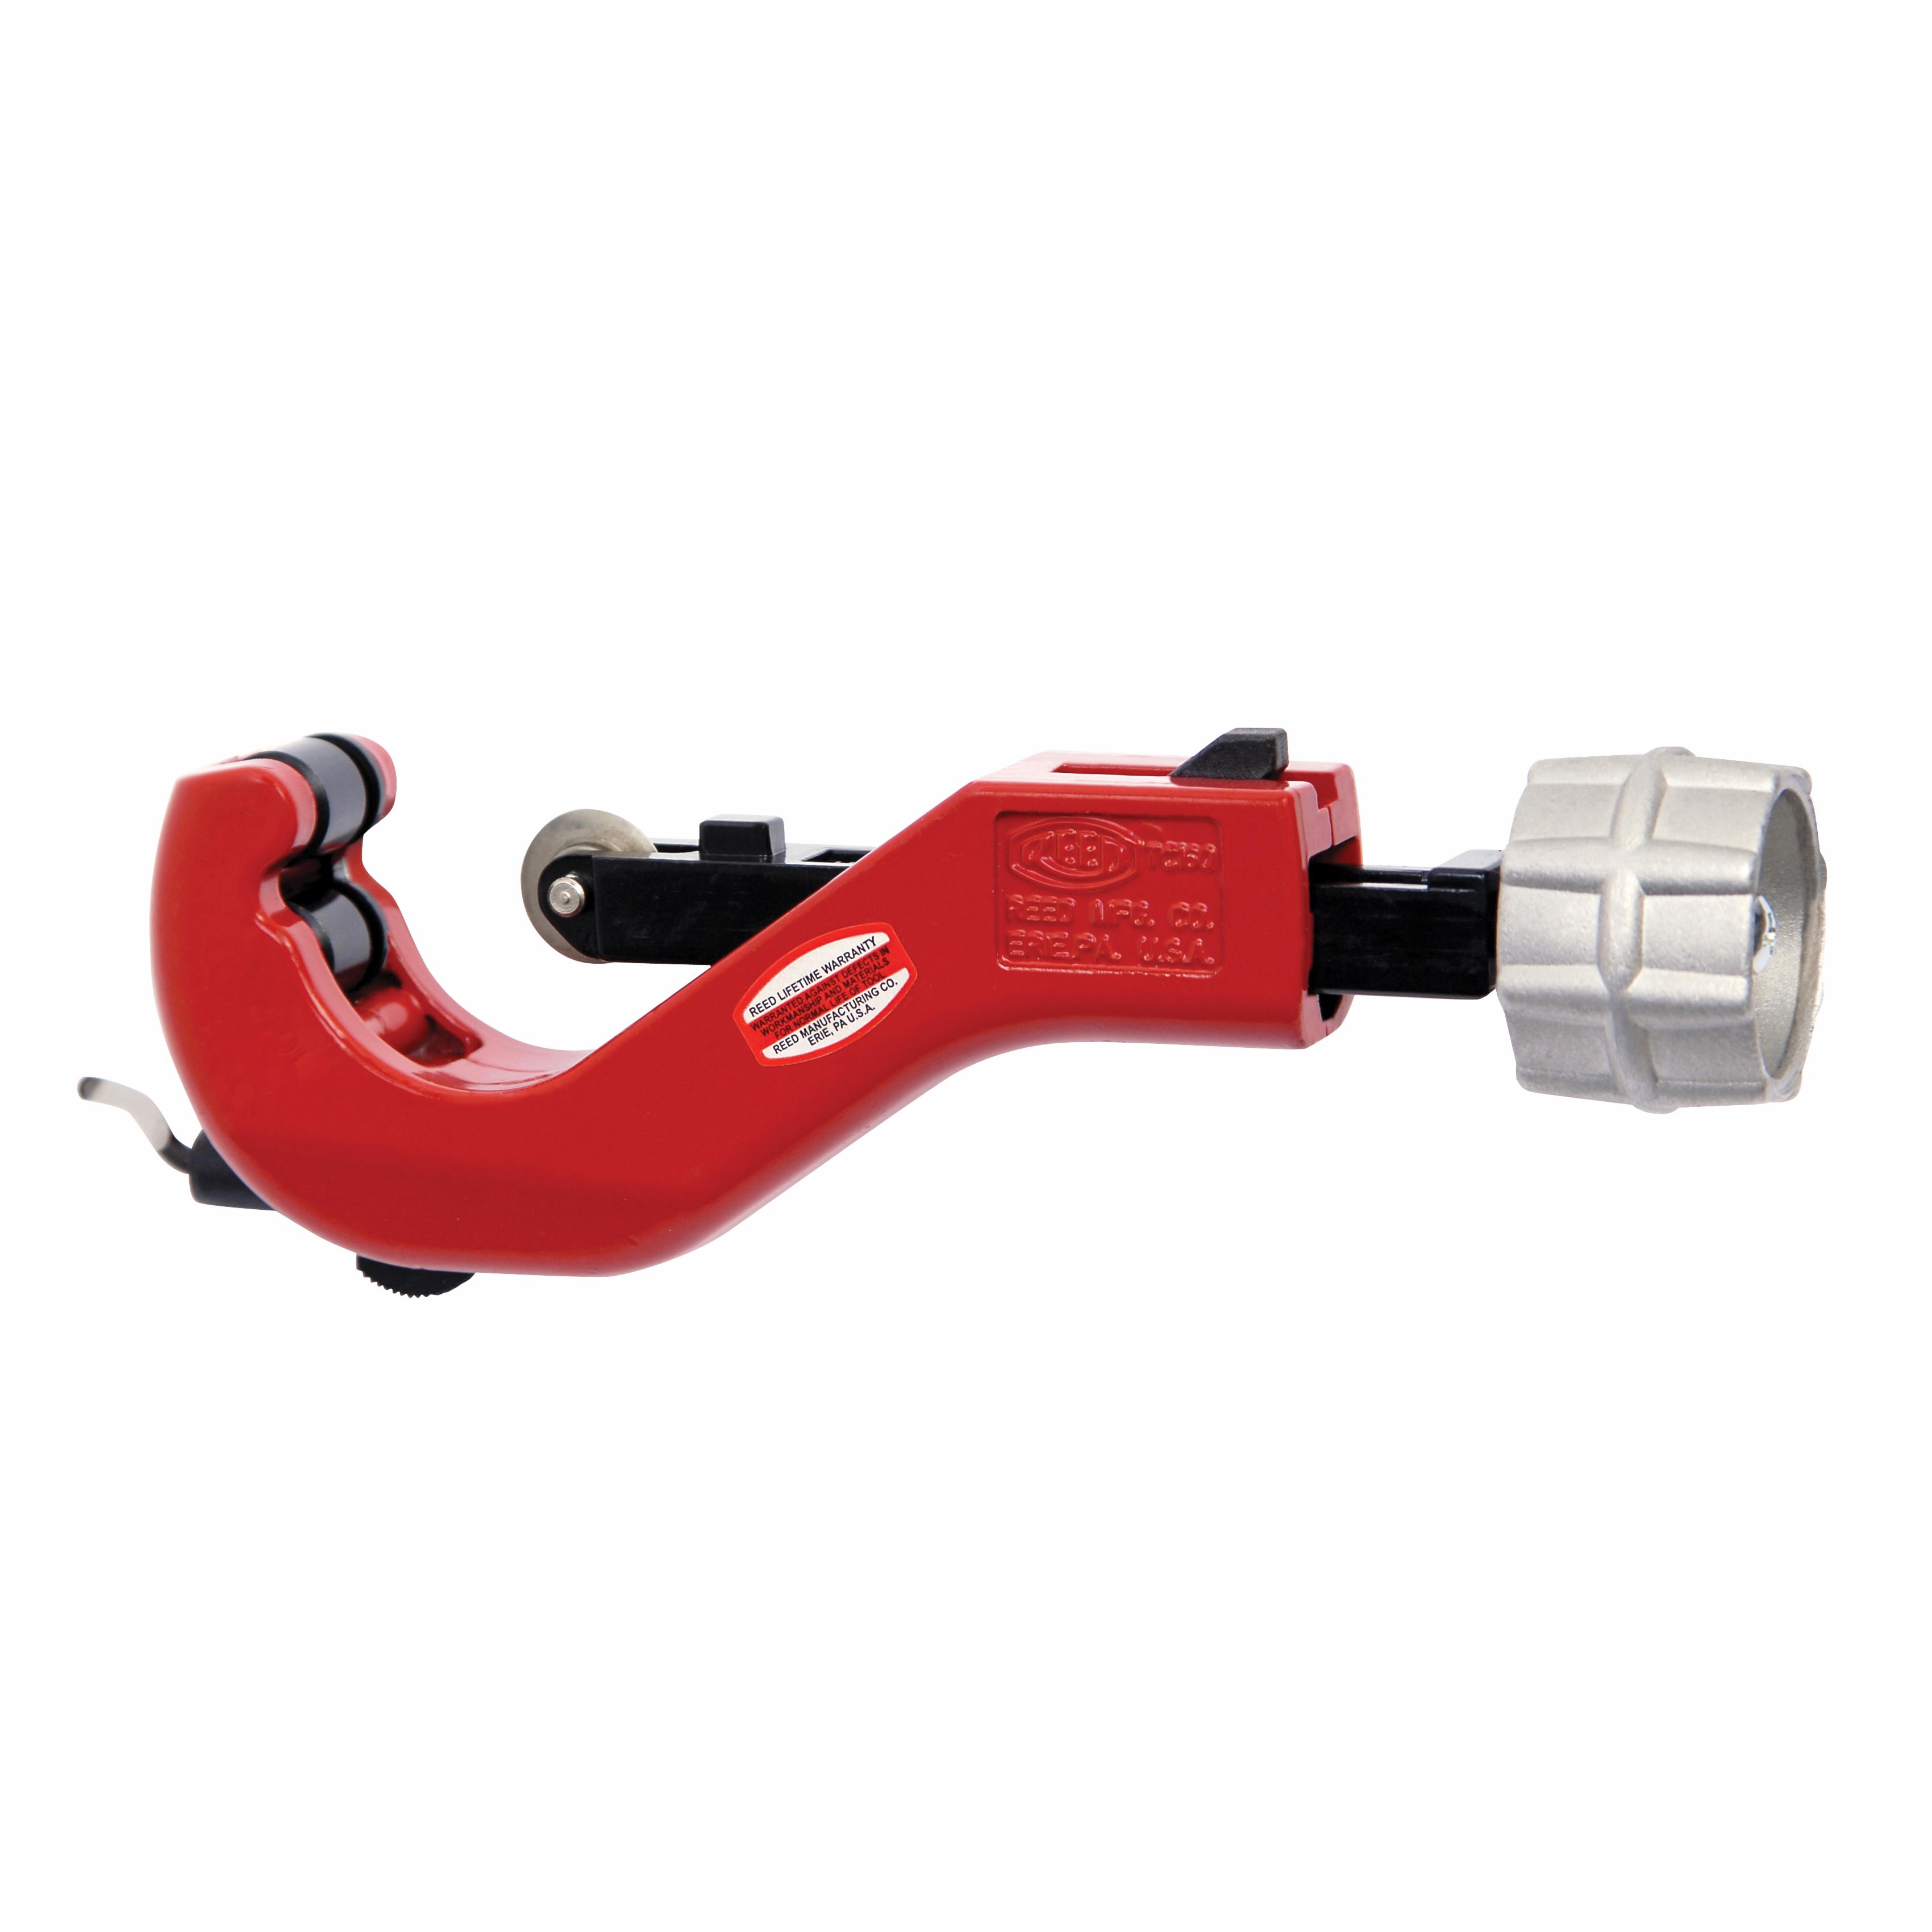 Reed 3416 Tube Cutter, 1/4 to 1-5/8 in Nominal